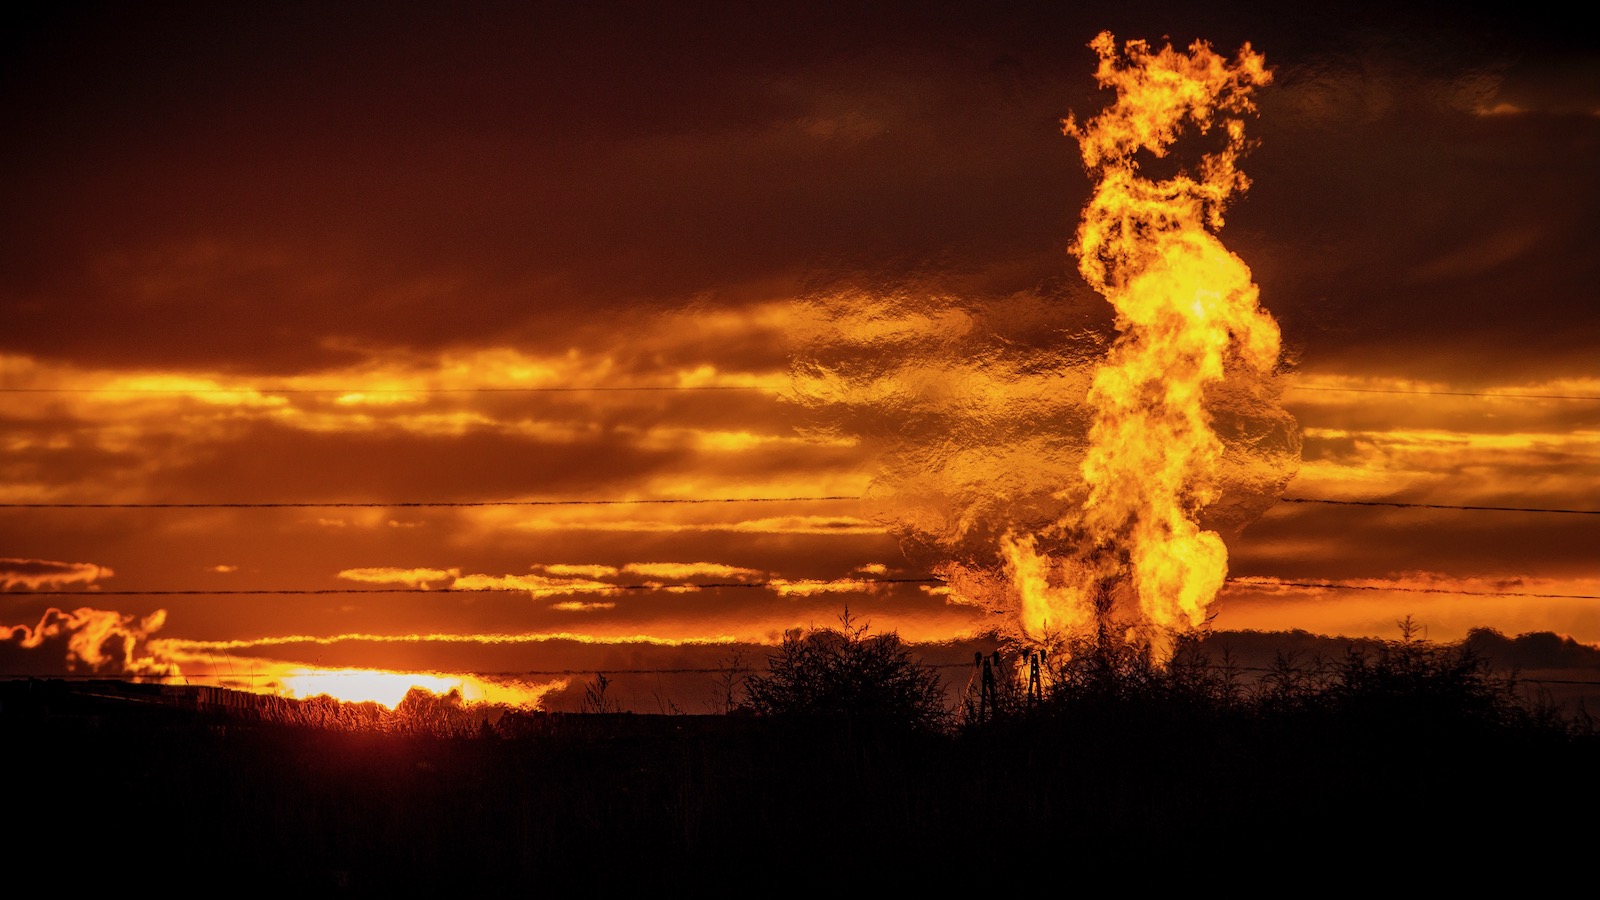 Oil well methane flare